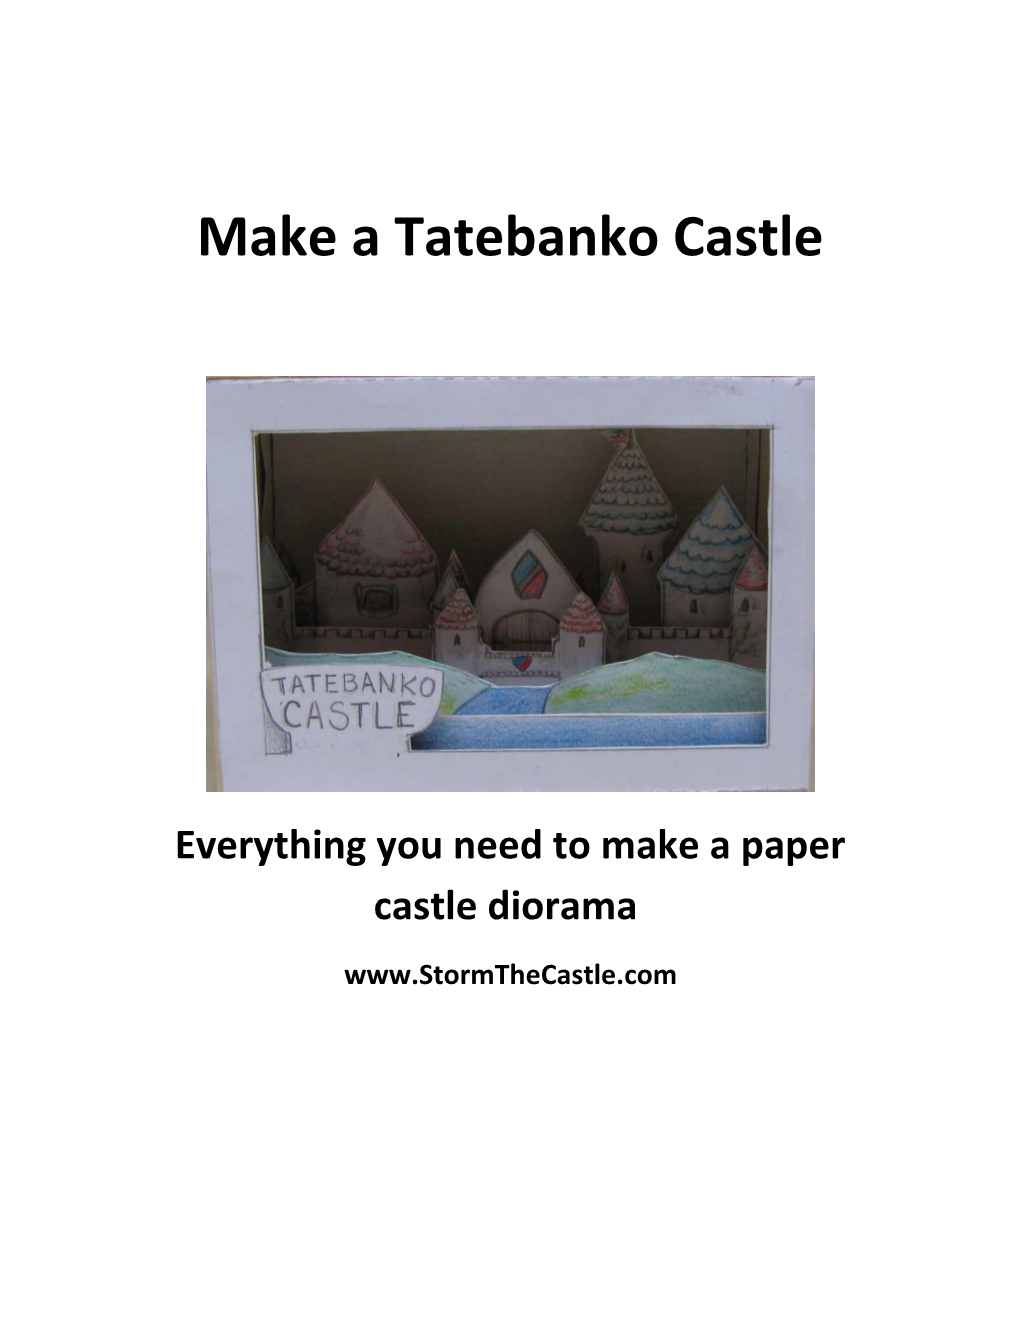 Everything You Need to Make a Paper Castle Diorama